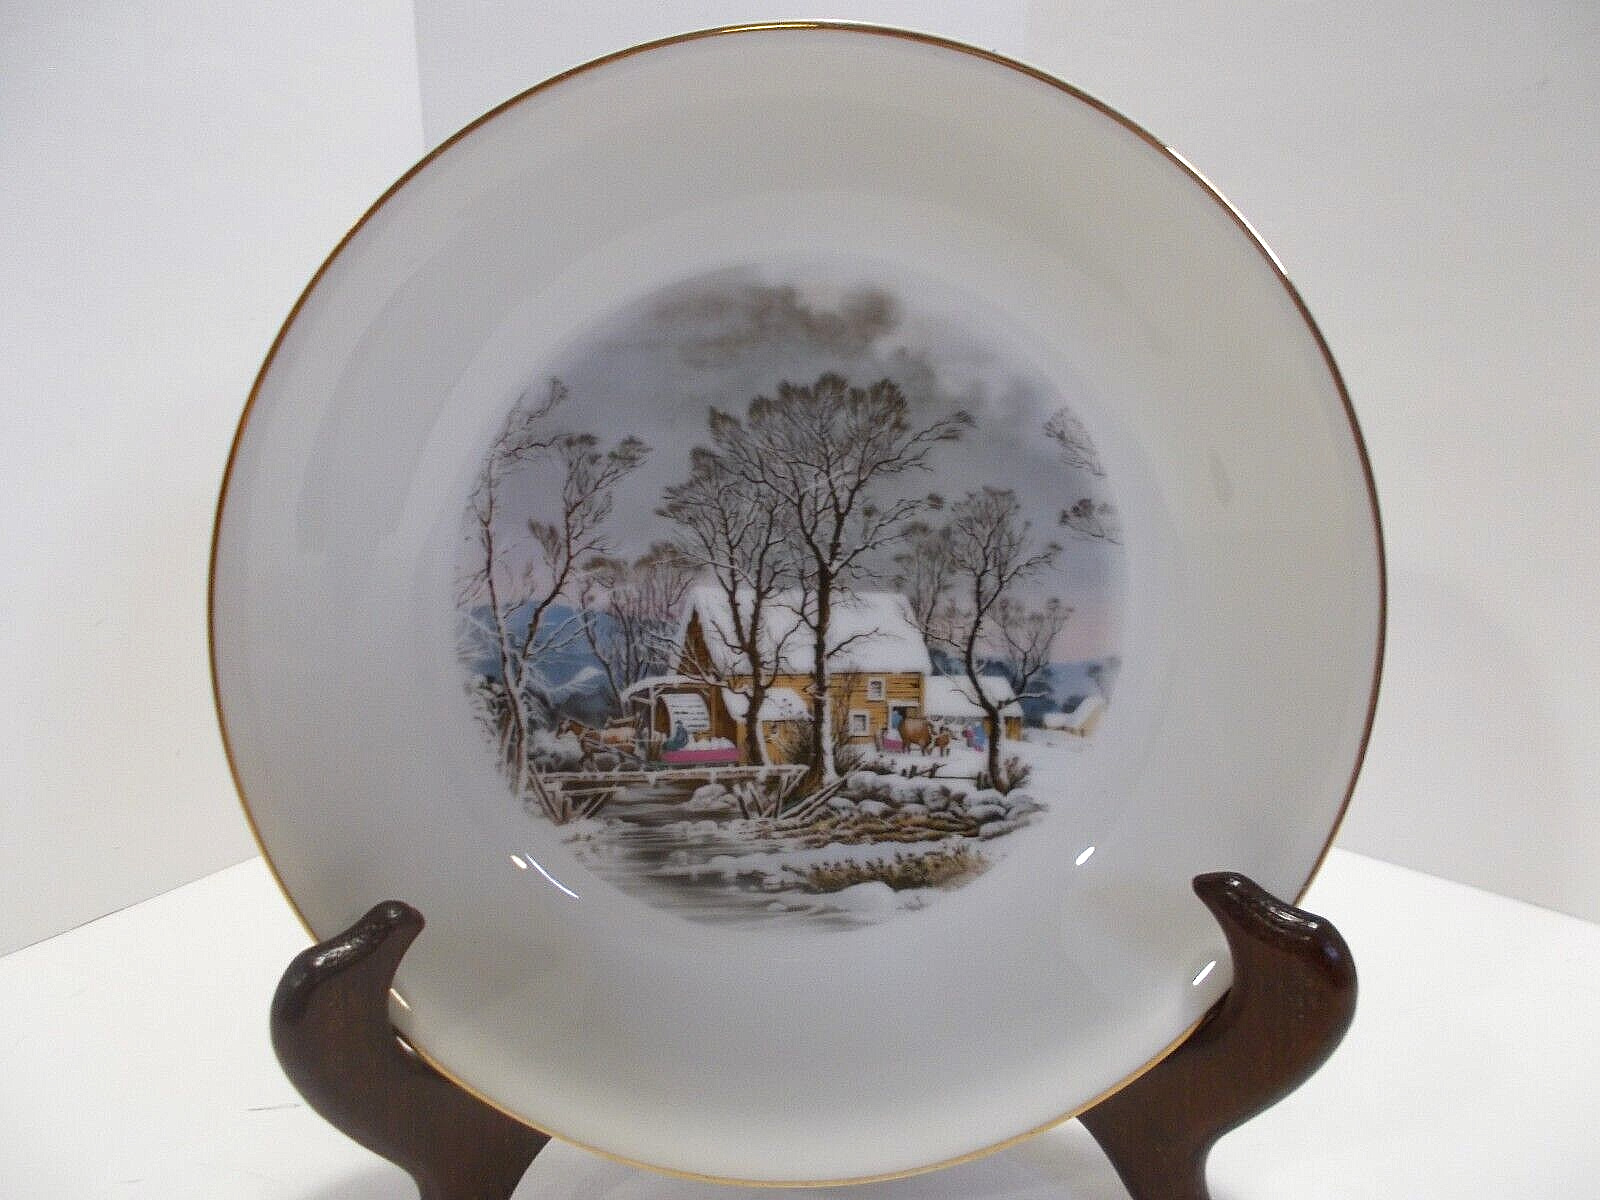 Avon 1981 Currier and Ives Winter Snow Scene Exclusive Soup Bowl Porcelain